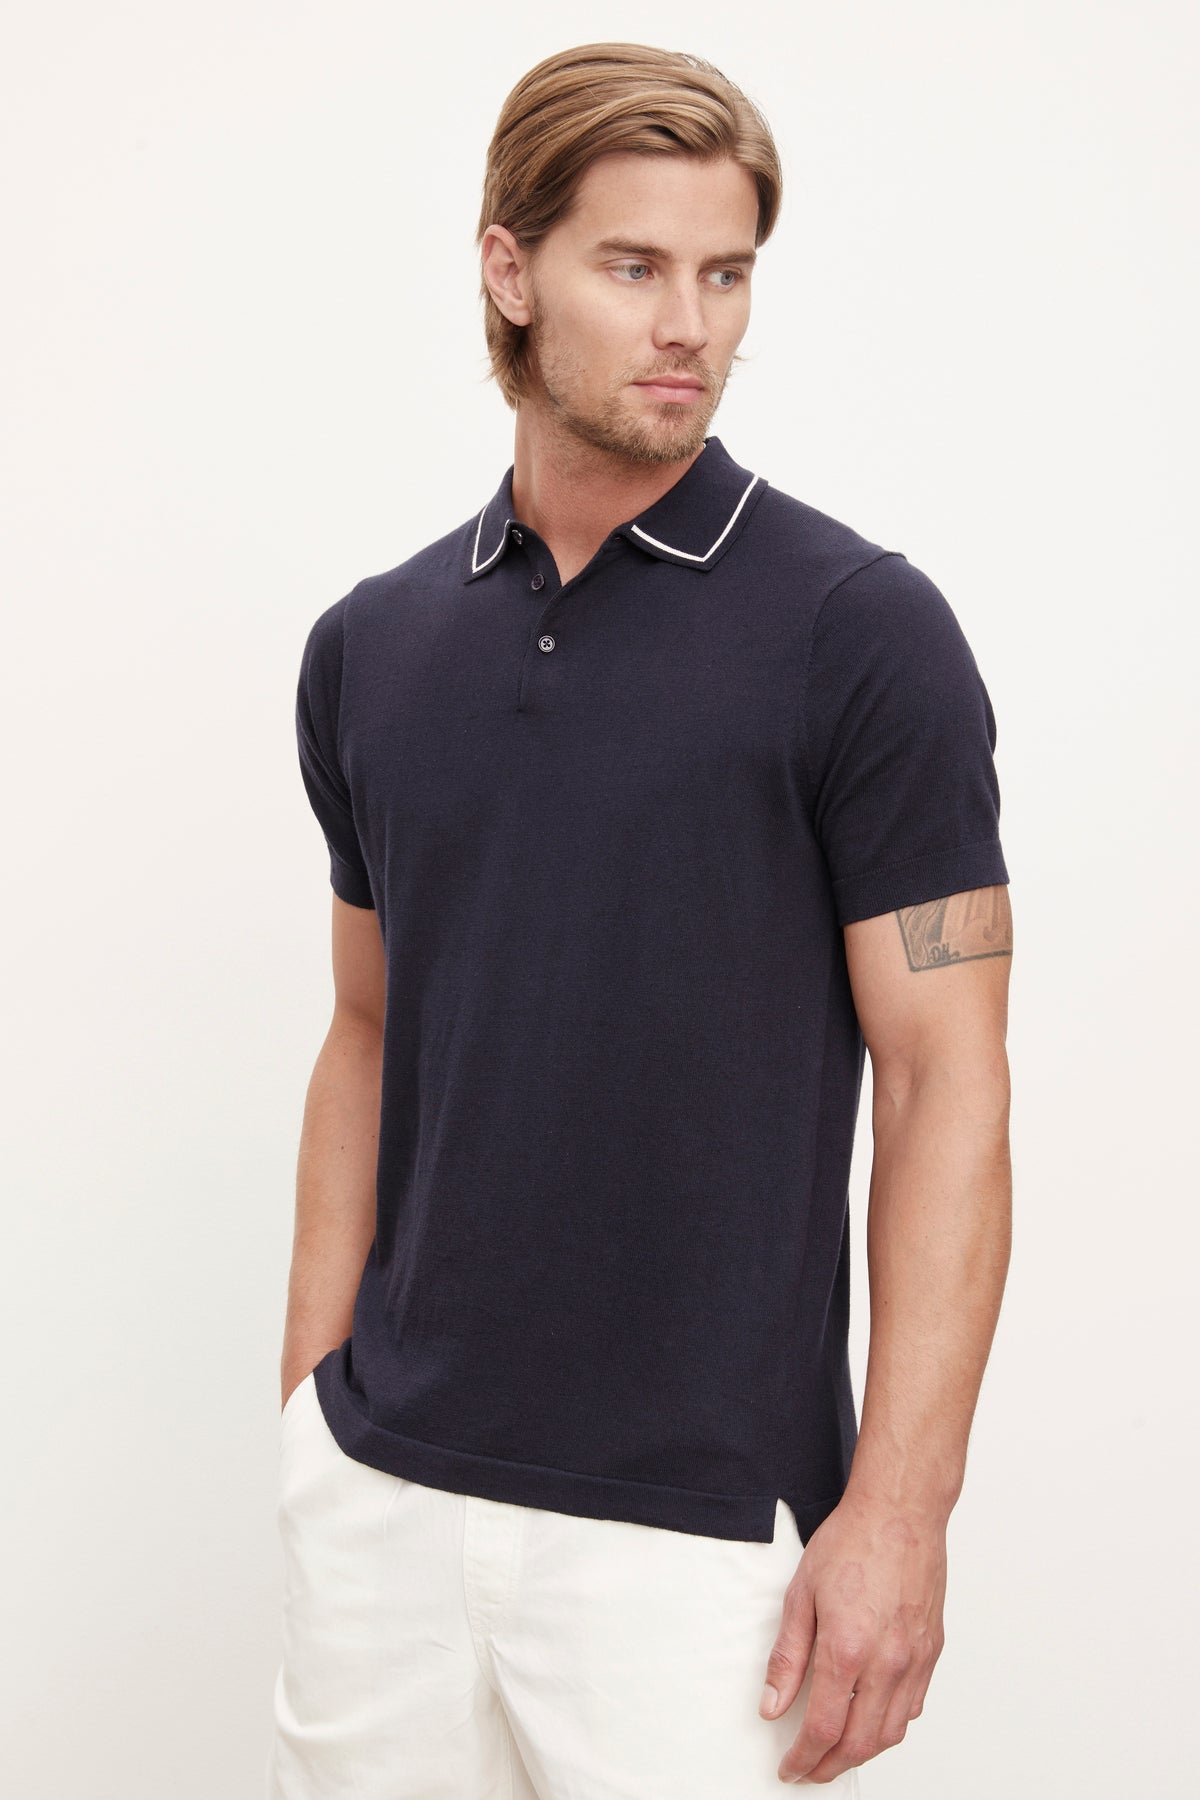 A man in a Velvet by Graham & Spencer Shepard polo shirt and white pants standing against a light background, looking to the side with a subtle expression.-36753534746817